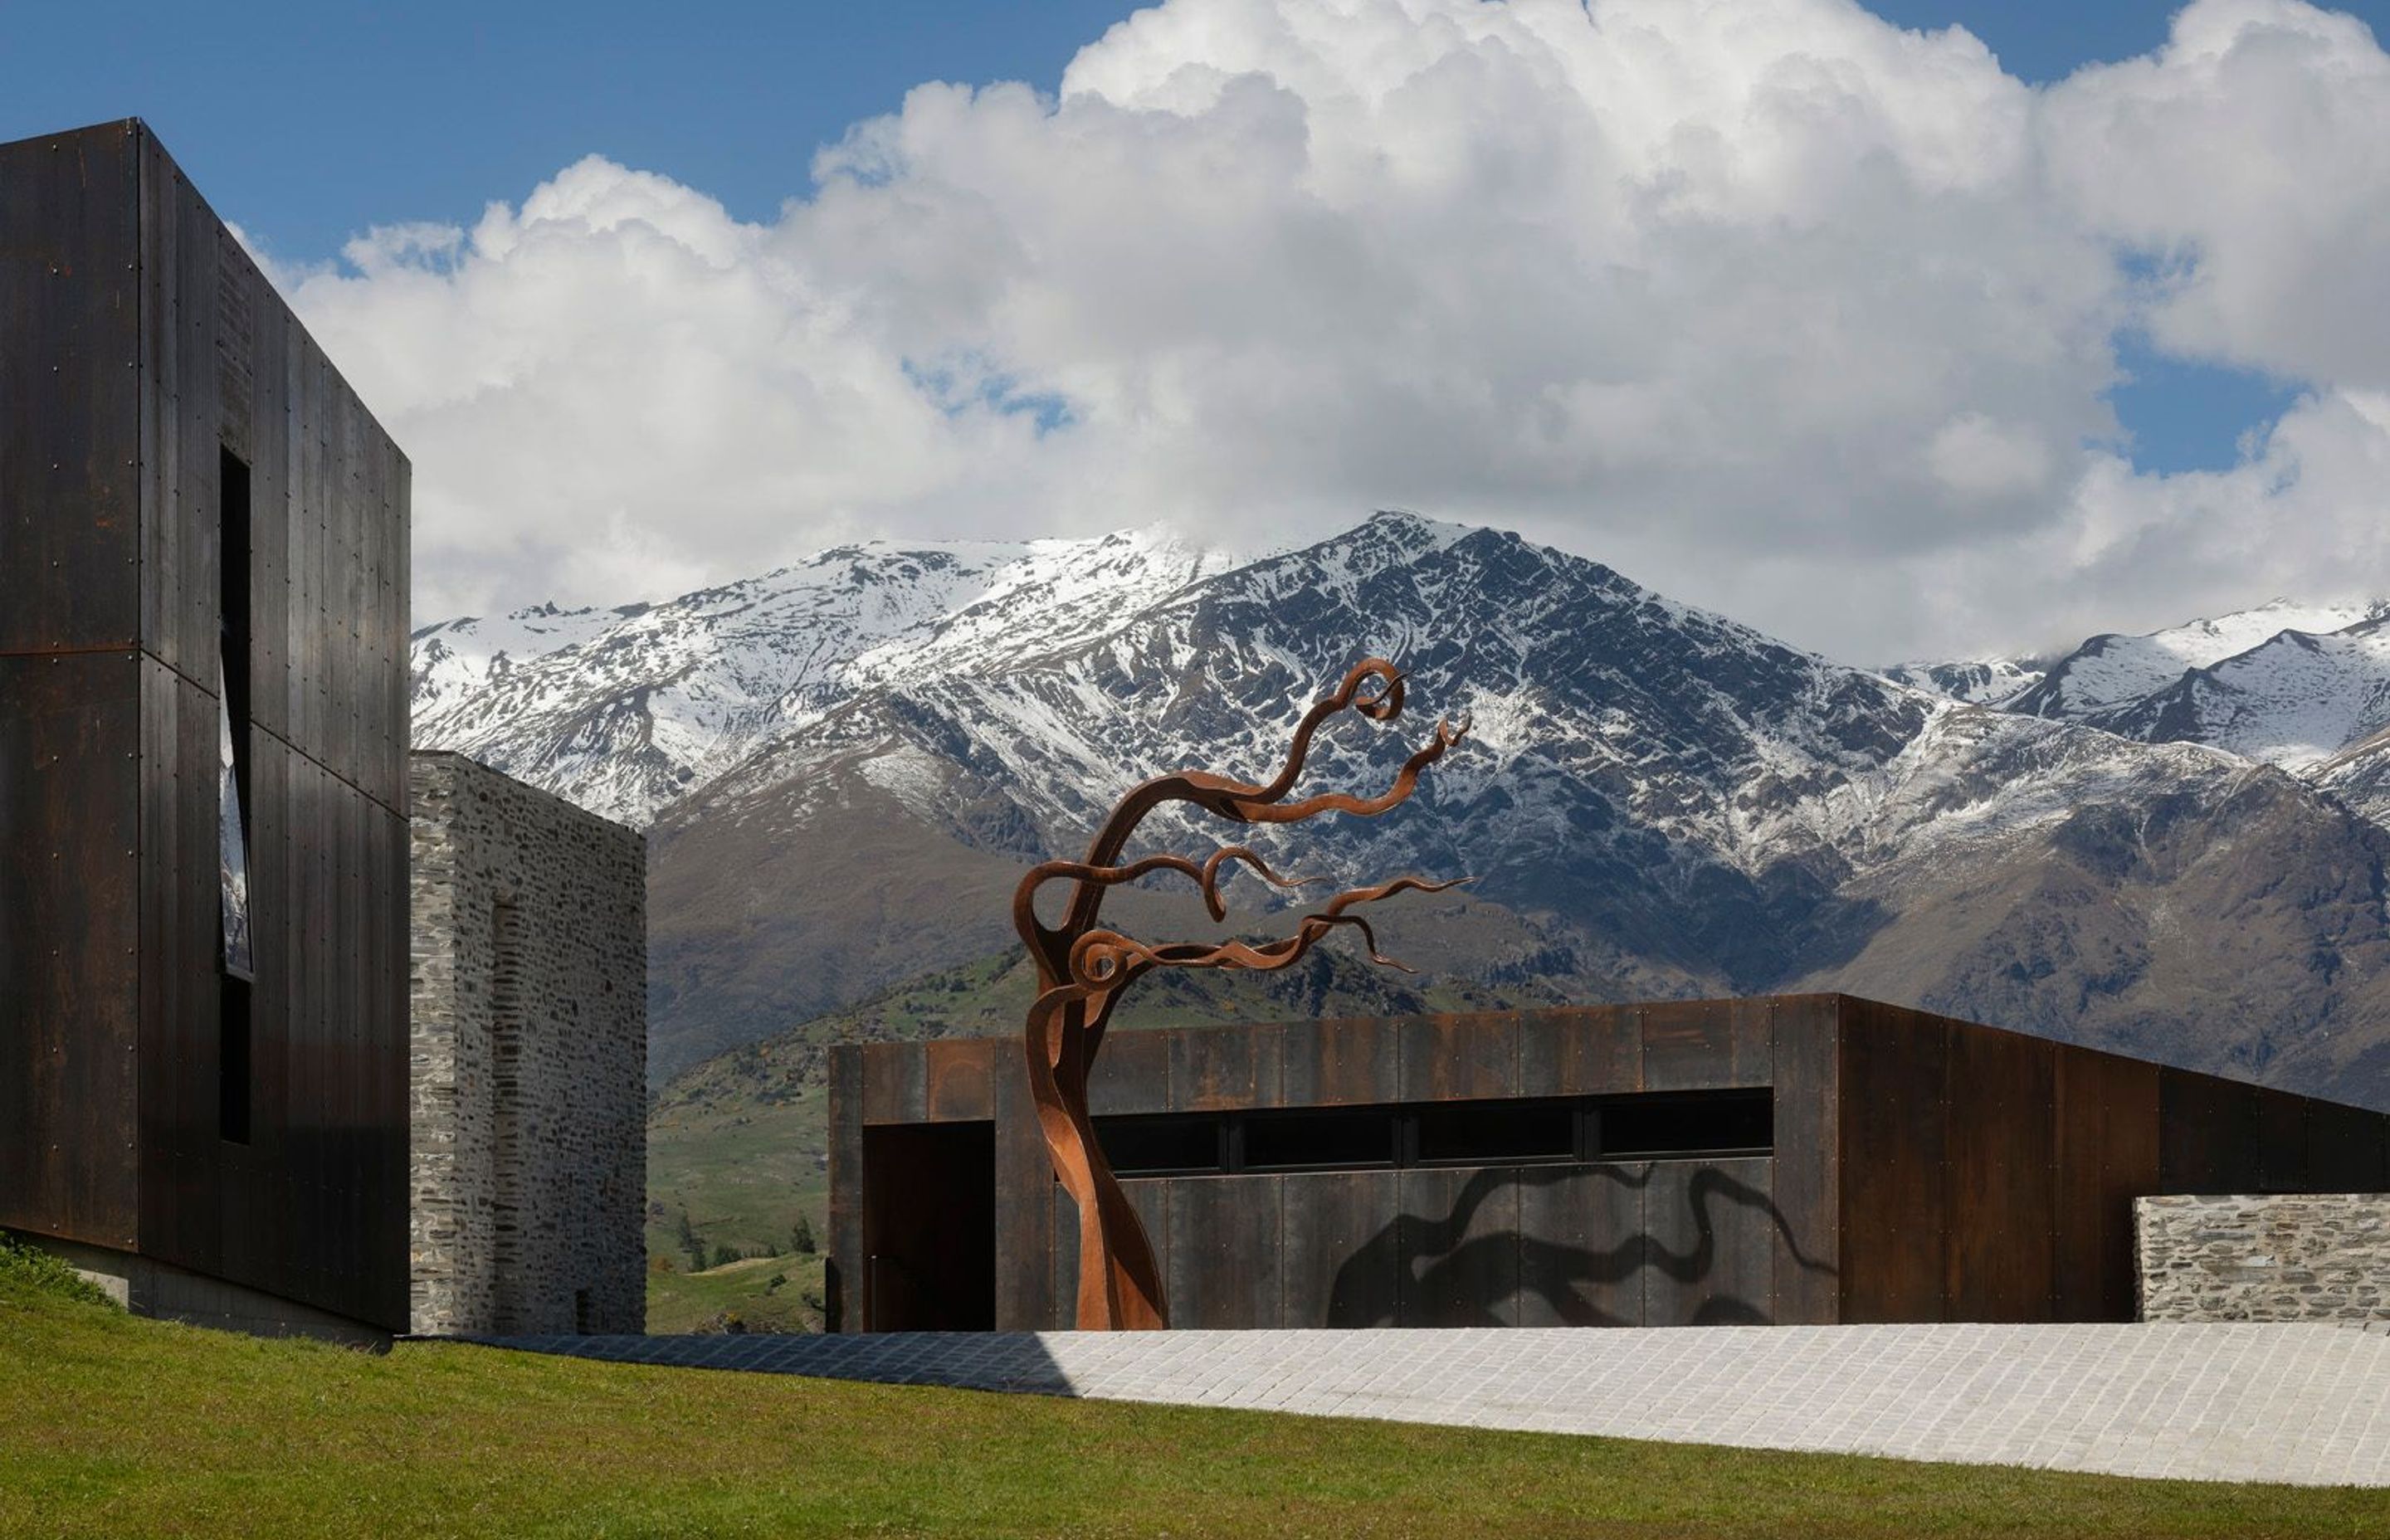 Within this mountainous backdrop, the owner's Corten steel sculpture holds its own as a central focus of the central courtyard.